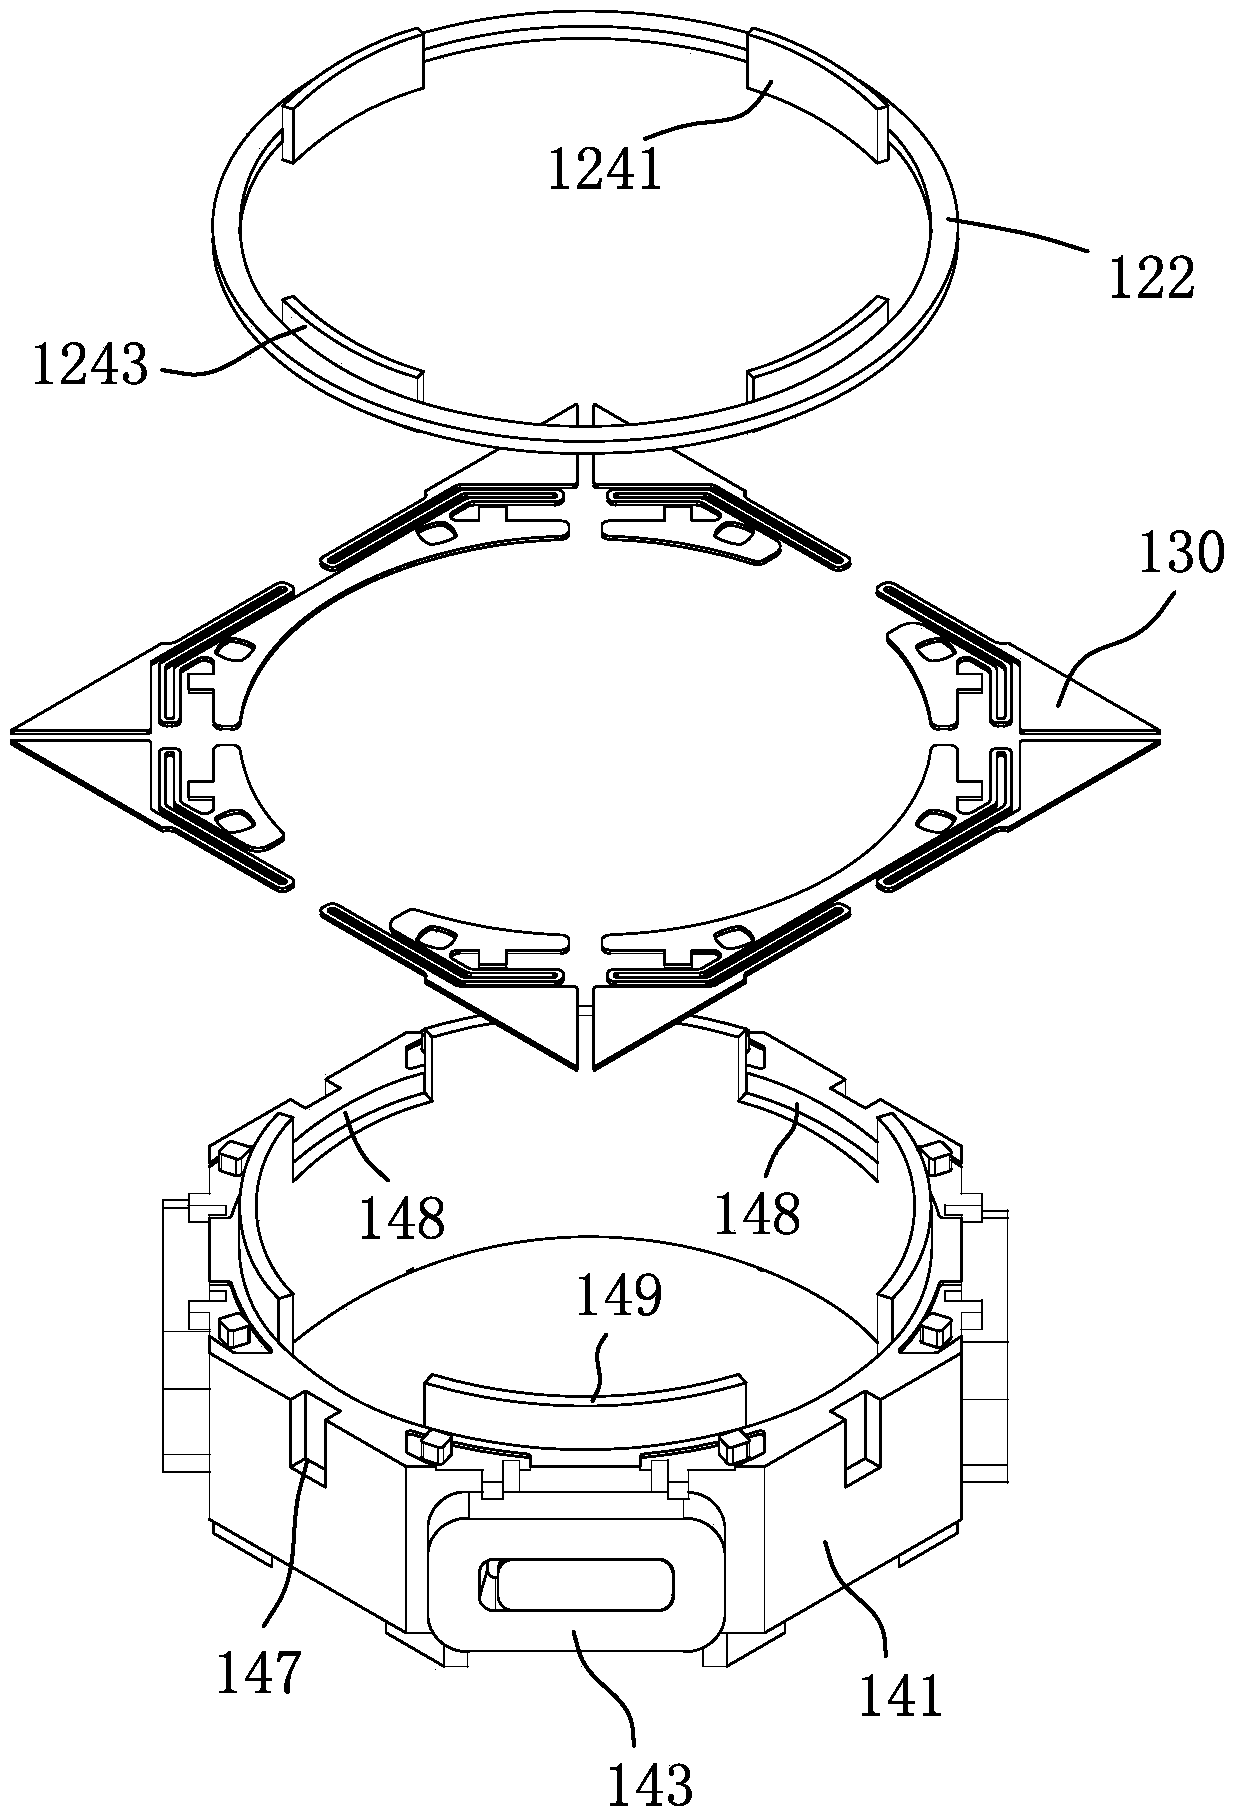 Anti-magnetic interference translational optical anti-vibration voice coil motor and assembly method thereof